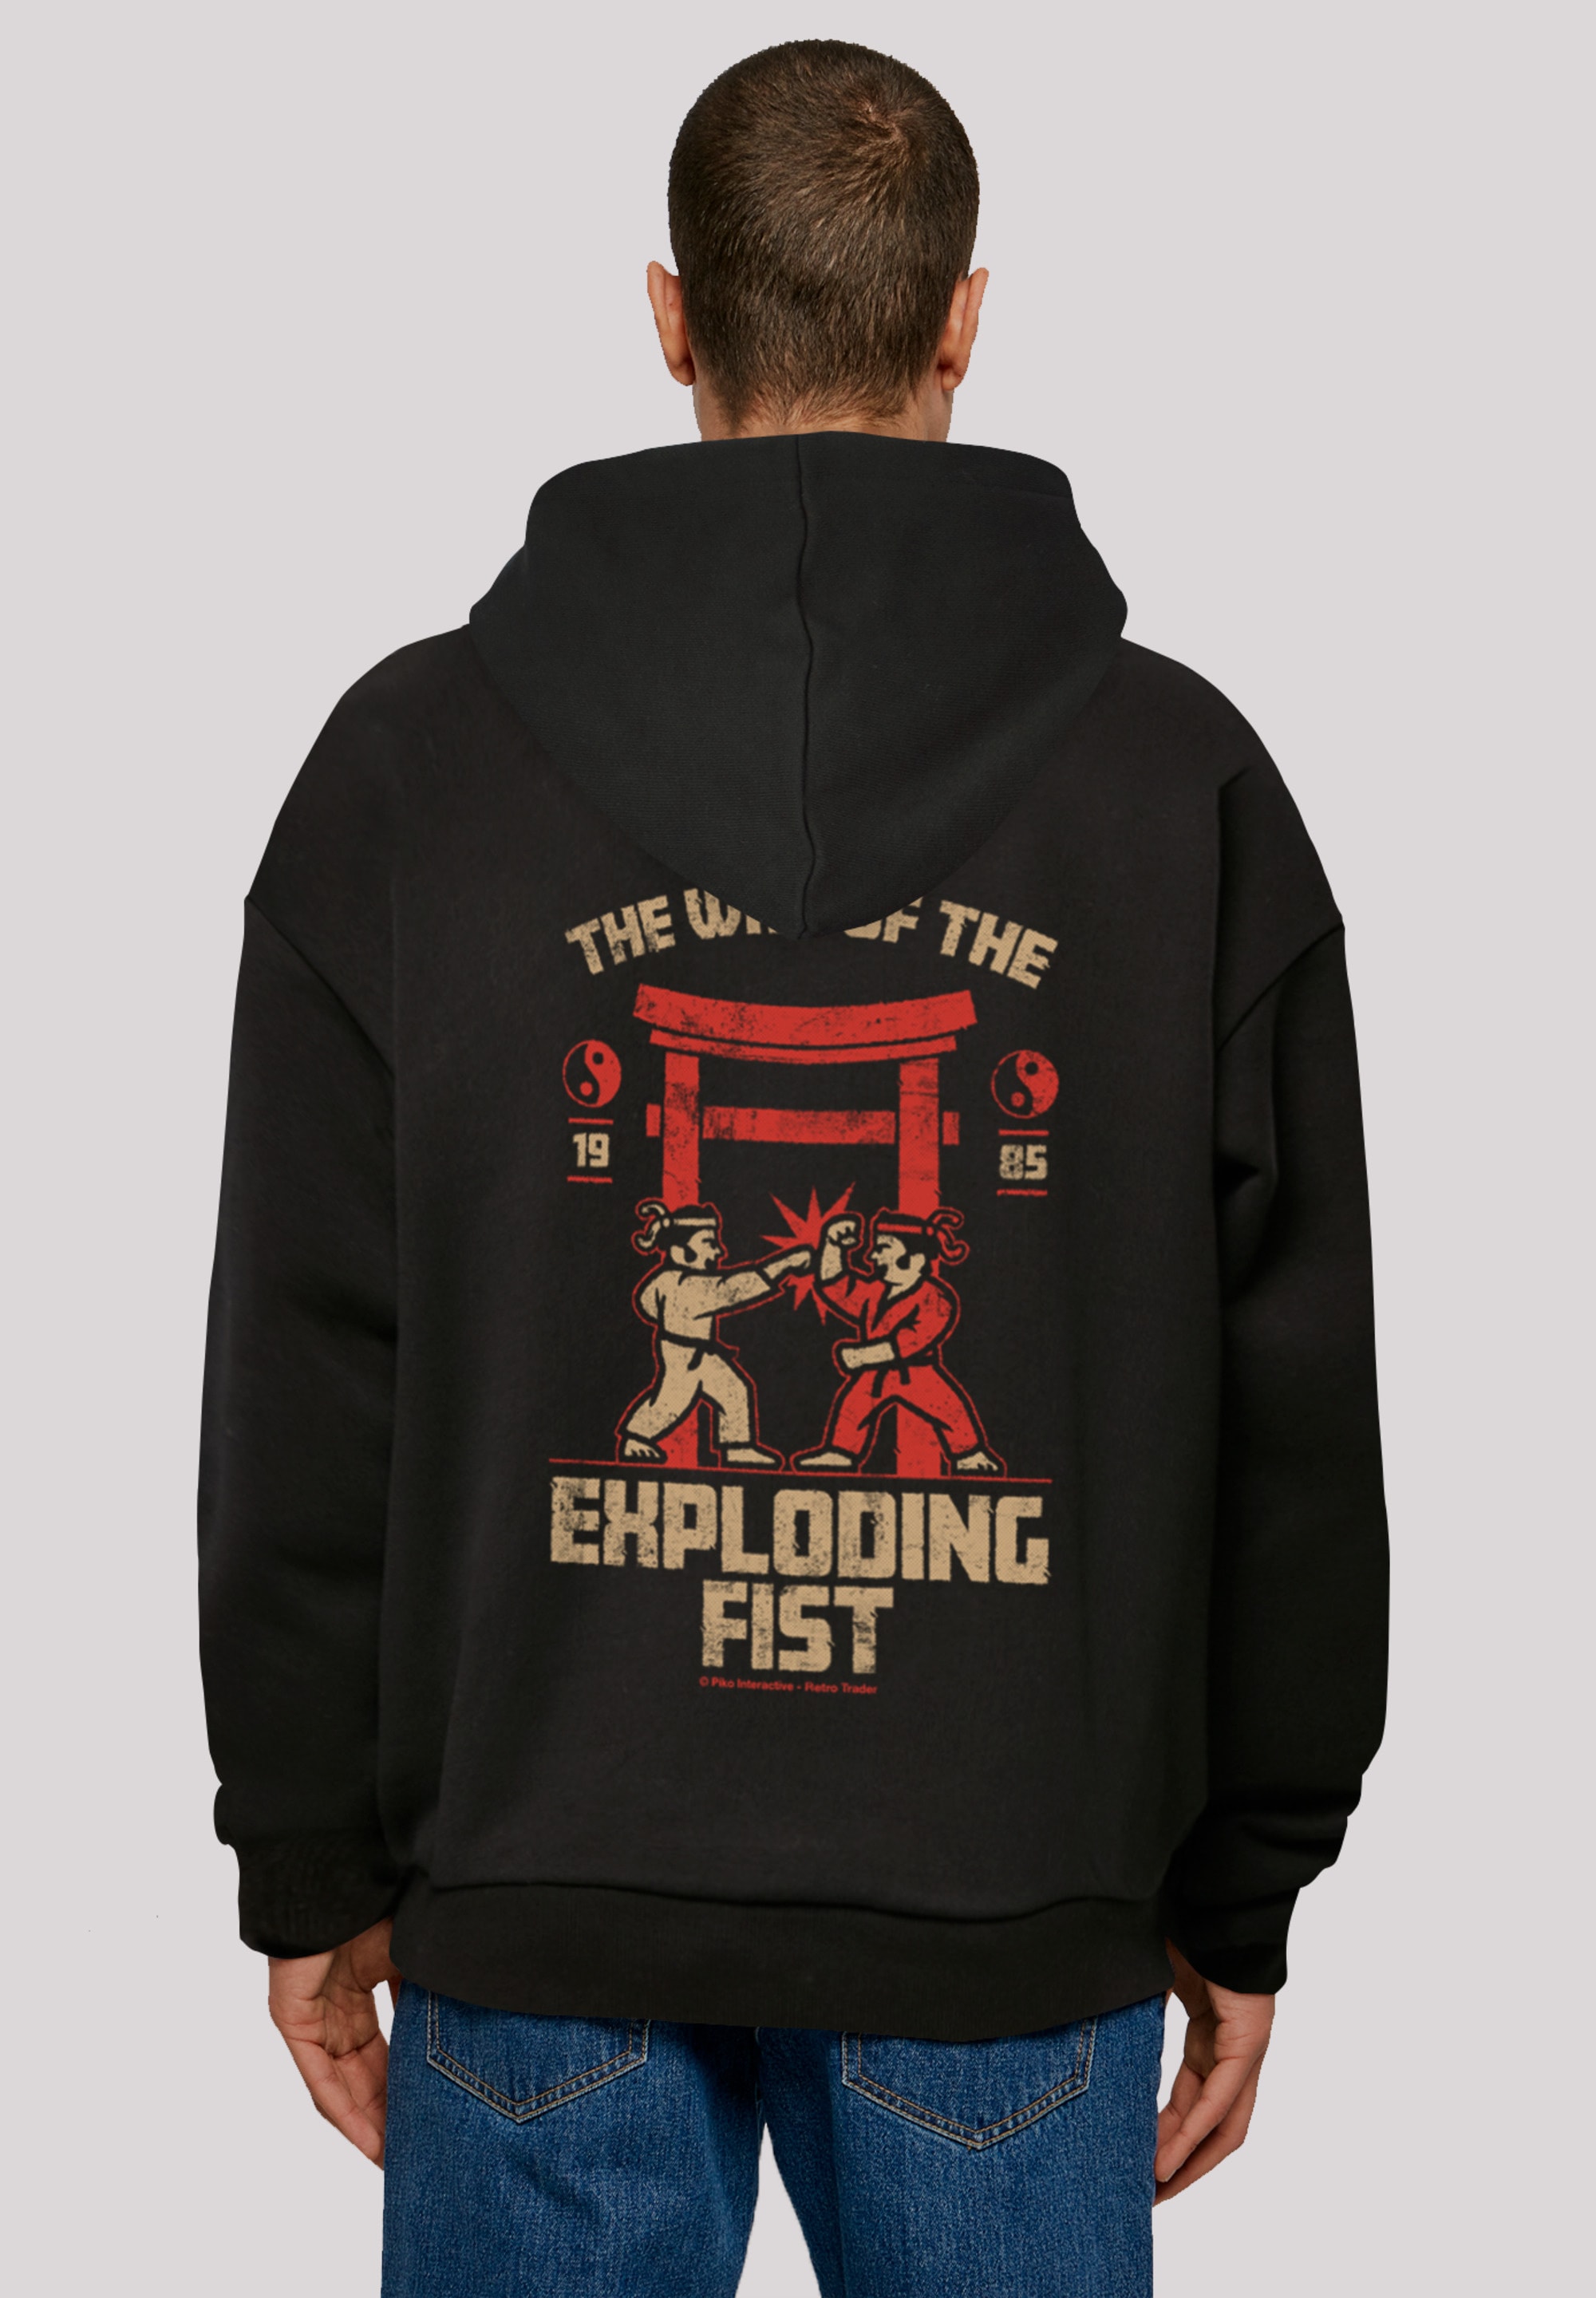 F4NT4STIC Kapuzenpullover »The Way of the Exploding Fist RETRO KARATE FIGHTING GAME«, Print